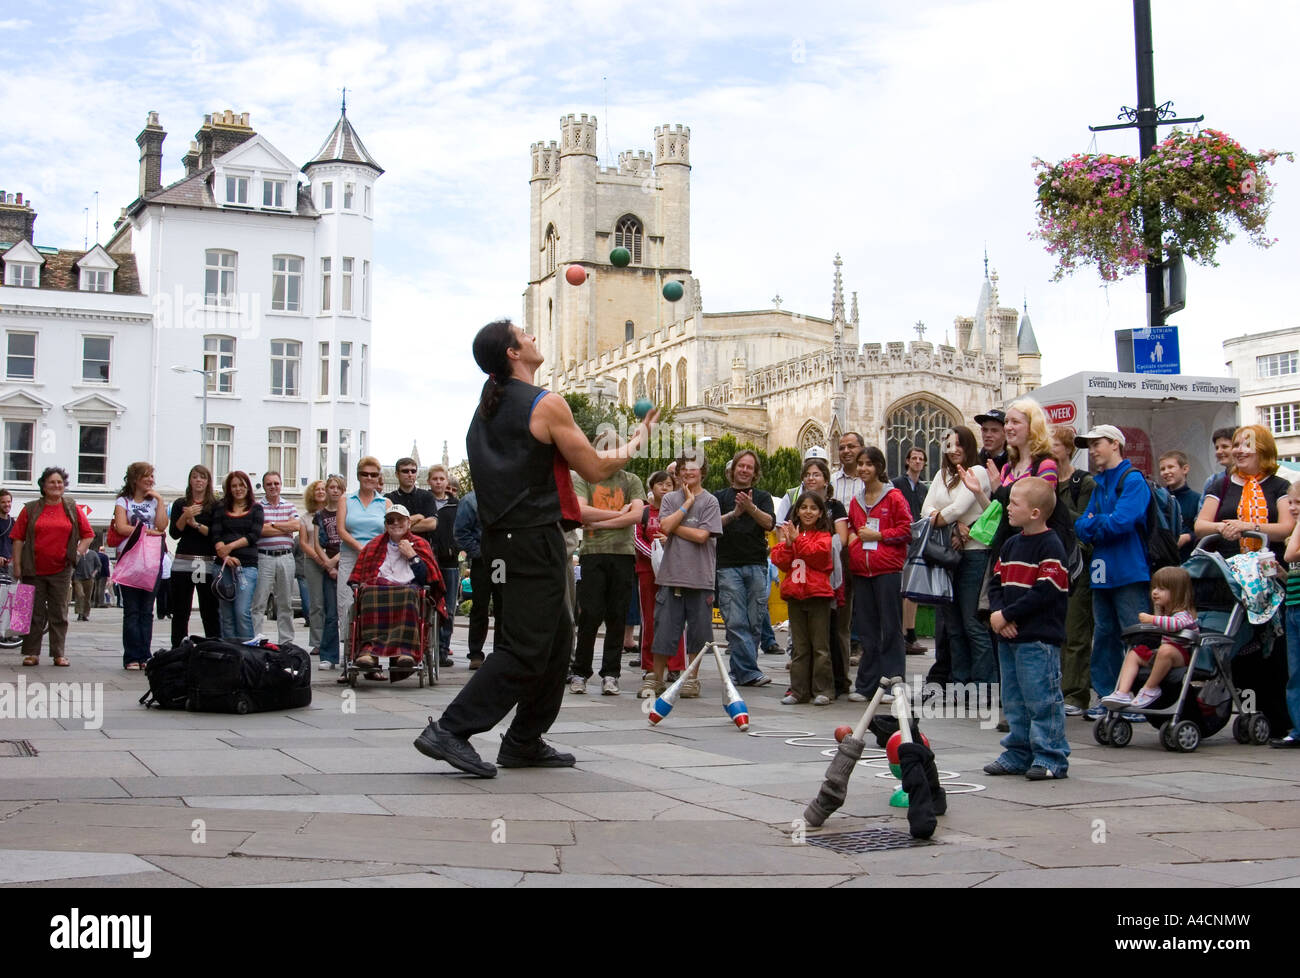 Street performer juggling in Cambridge market square, England Stock Photo